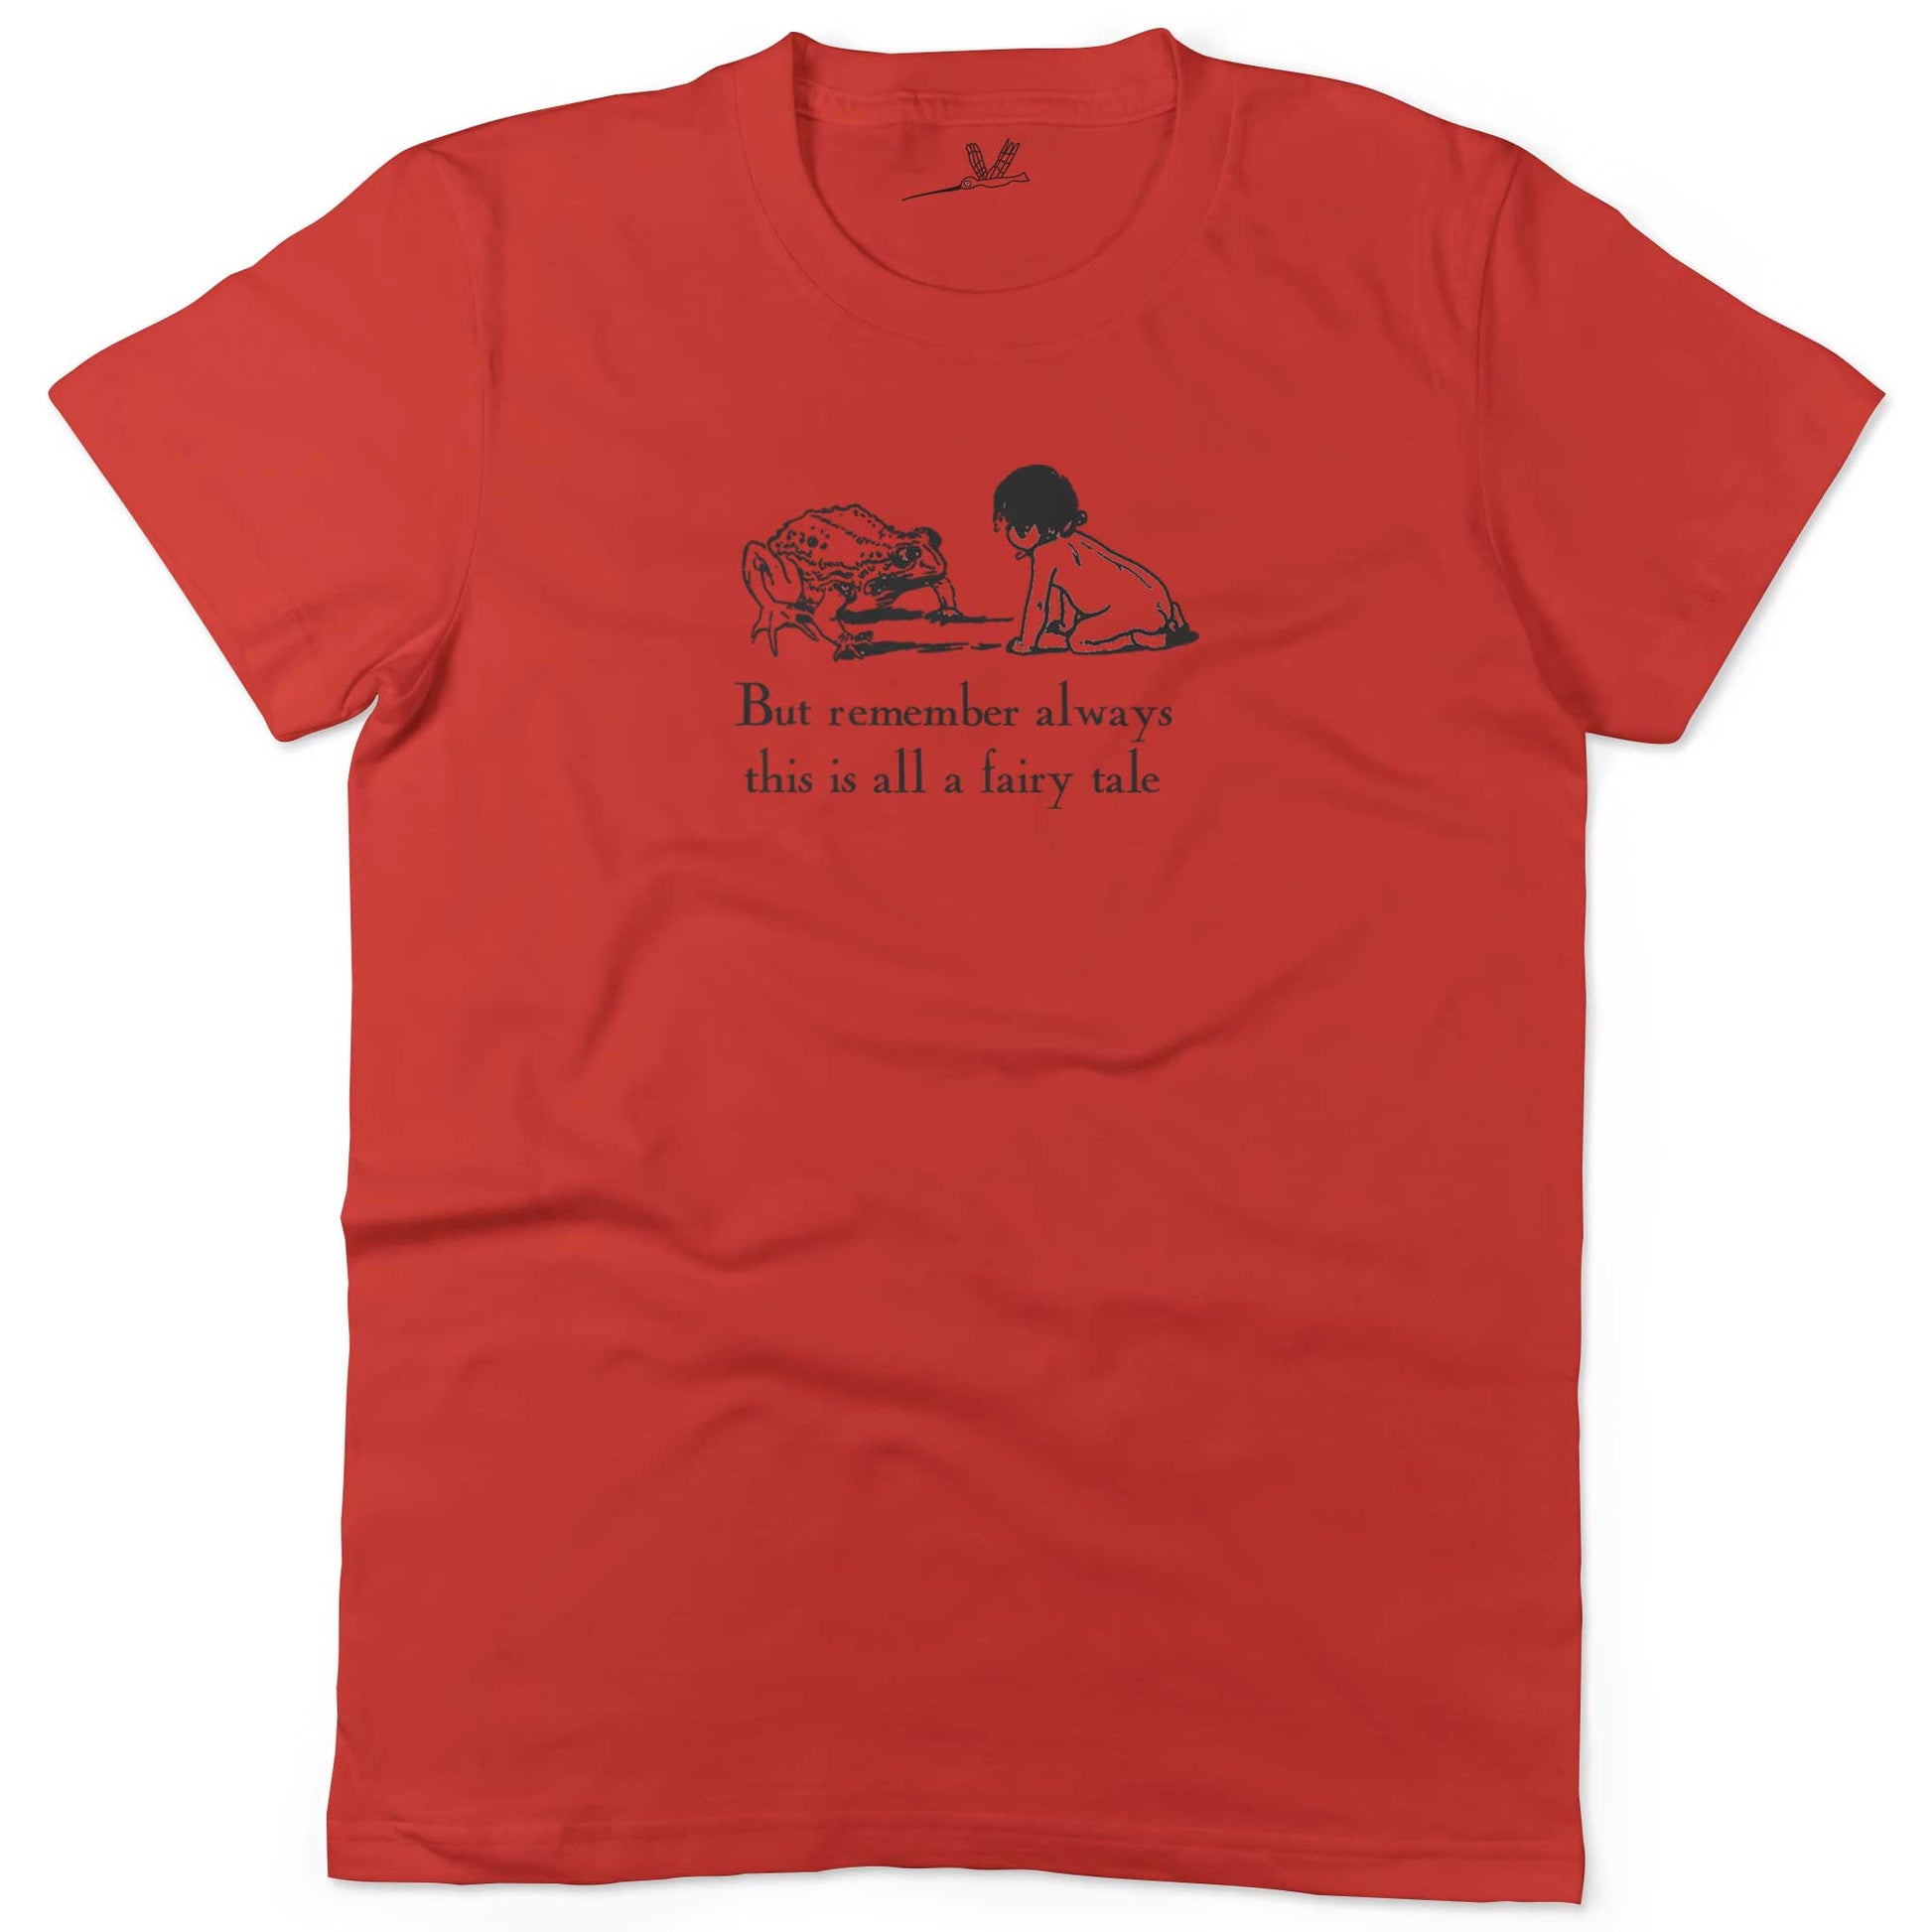 But remember always this is all a fairy tale Unisex Or Women's Cotton T-shirt-Red-Woman